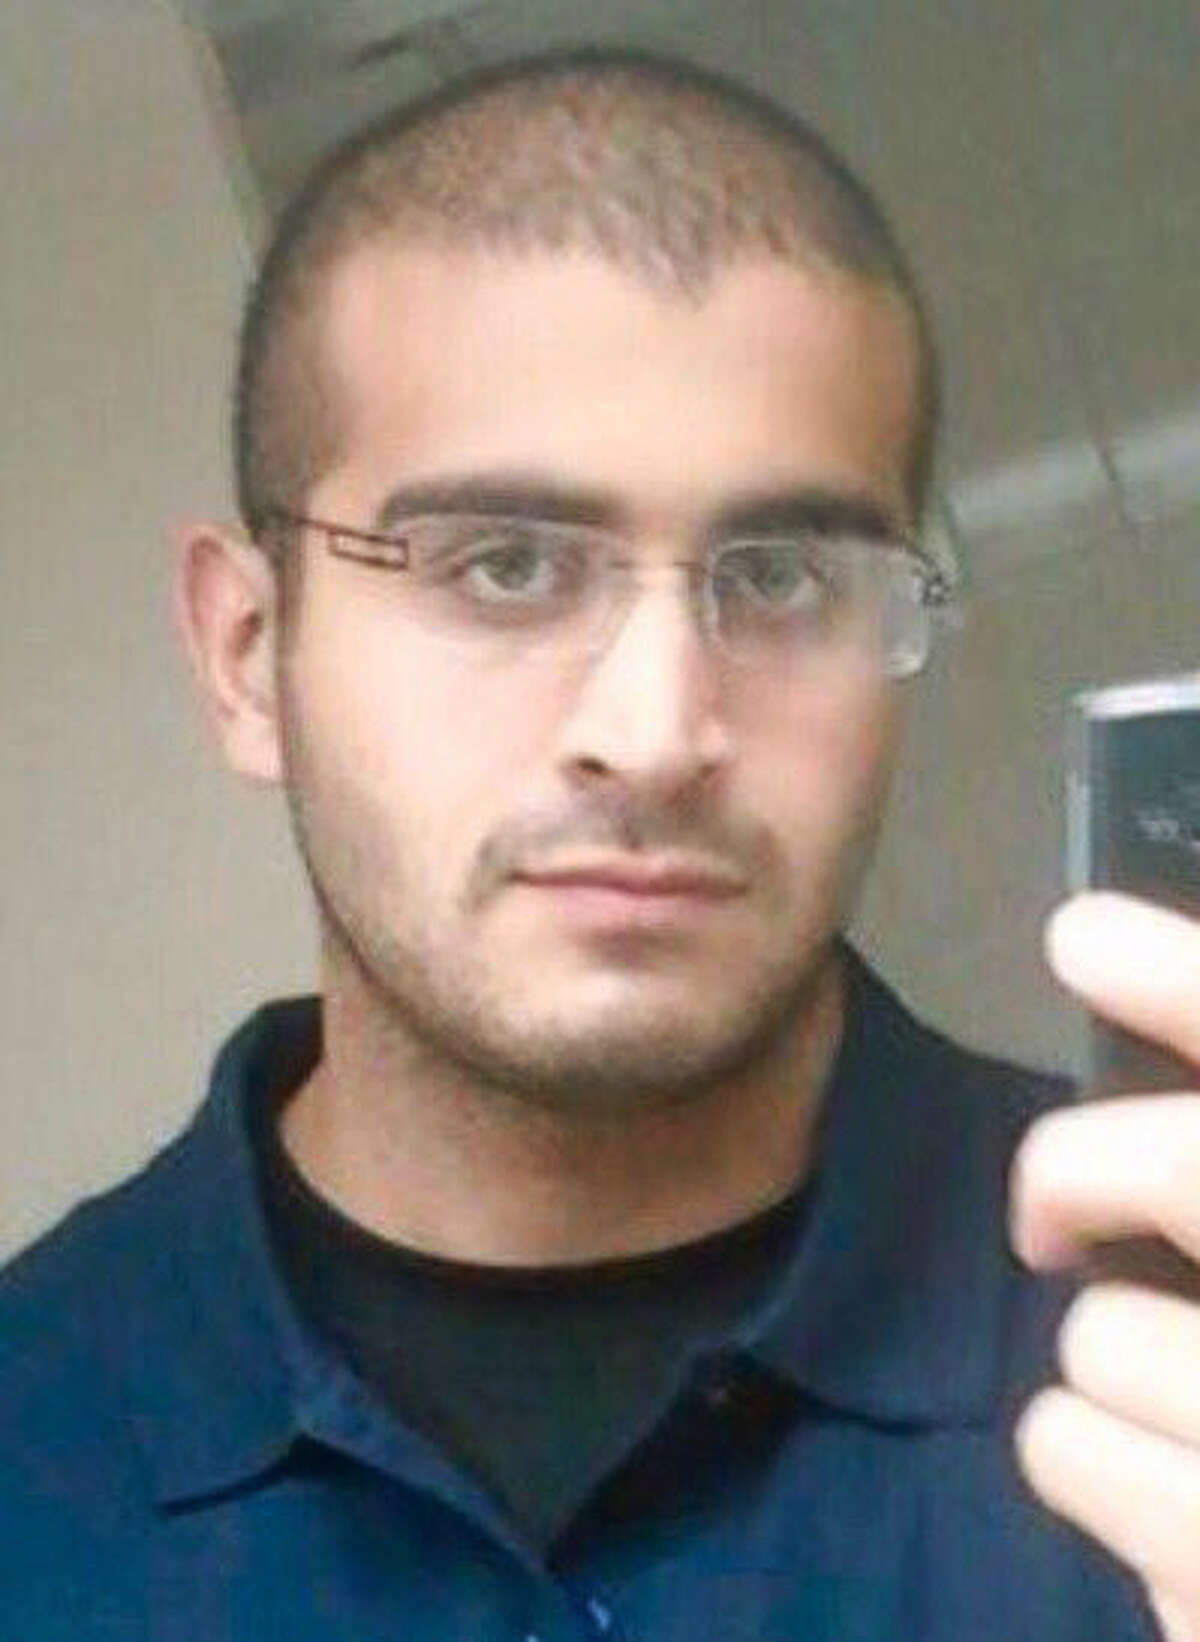 This undated image provided by the Orlando Police Department shows Omar Mateen, the shooting suspect at the Pulse nightclub in Orlando, Fla., Sunday, June 12, 2016. The gunman opened fire inside the crowded gay nightclub early Sunday before dying in a gunfight with SWAT officers, police said. (Orlando Police Department via AP)